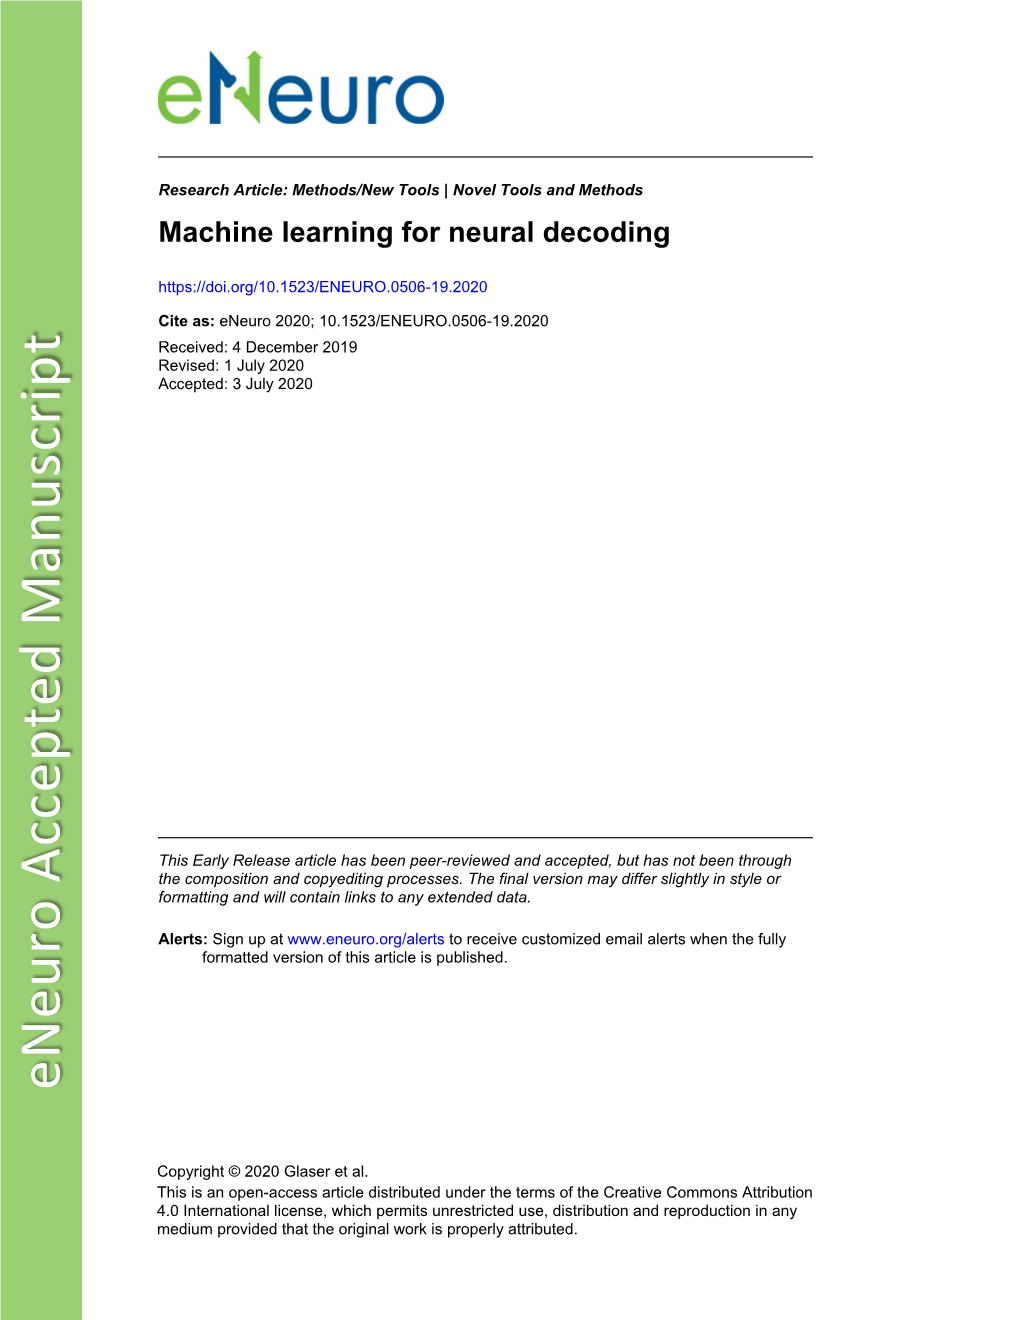 Machine Learning for Neural Decoding